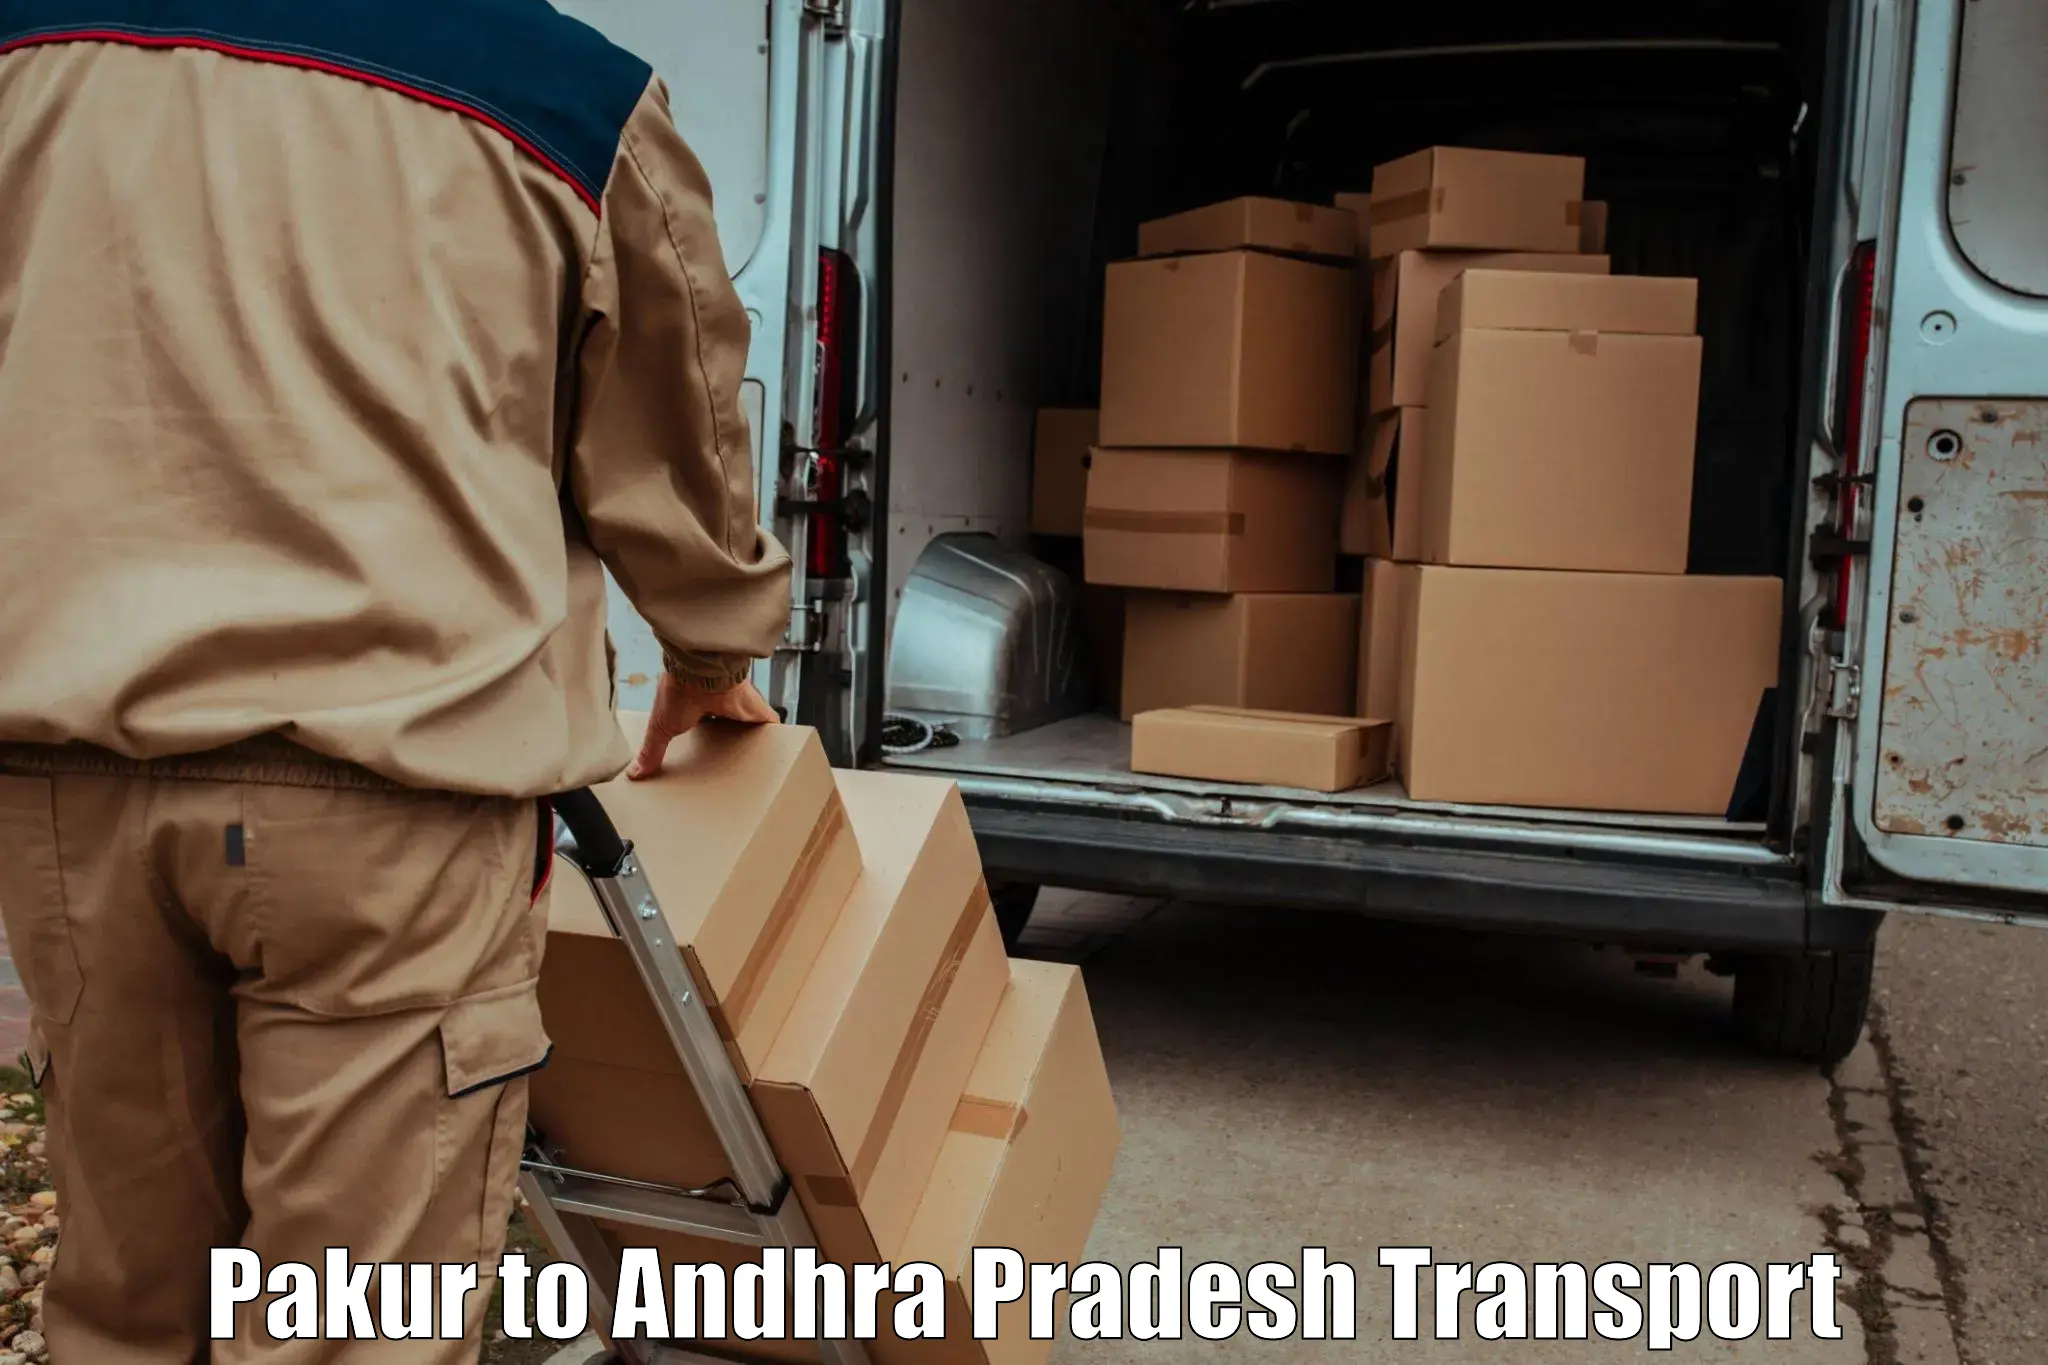 Express transport services Pakur to Changaroth